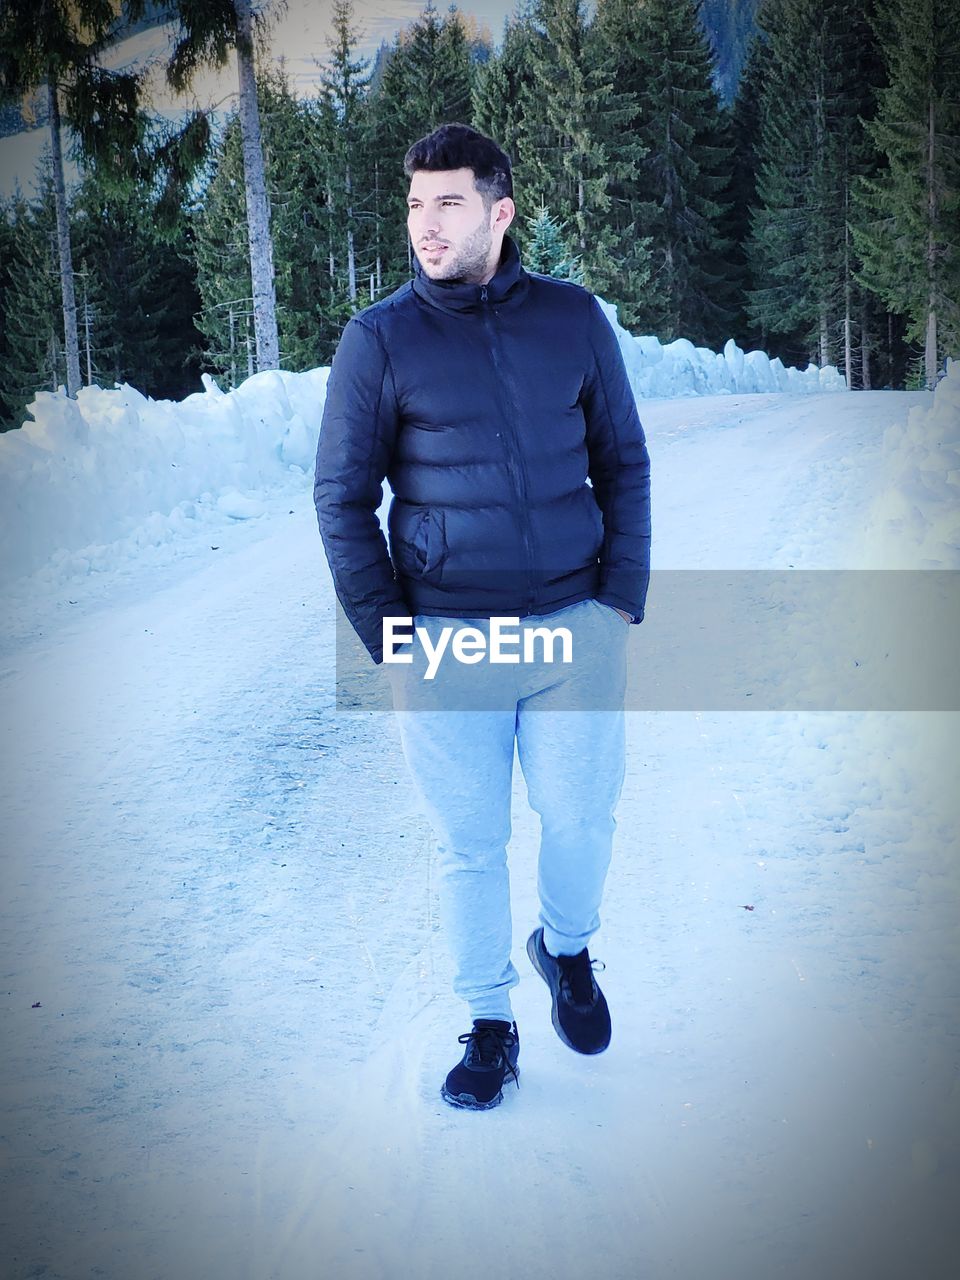 winter, cold temperature, snow, one person, footwear, clothing, tree, nature, warm clothing, blue, full length, leisure activity, young adult, adult, sports, front view, plant, lifestyles, day, portrait, men, standing, winter sports, land, forest, frozen, ice, outdoors, holiday, environment, looking at camera, hat, person, freezing, vacation